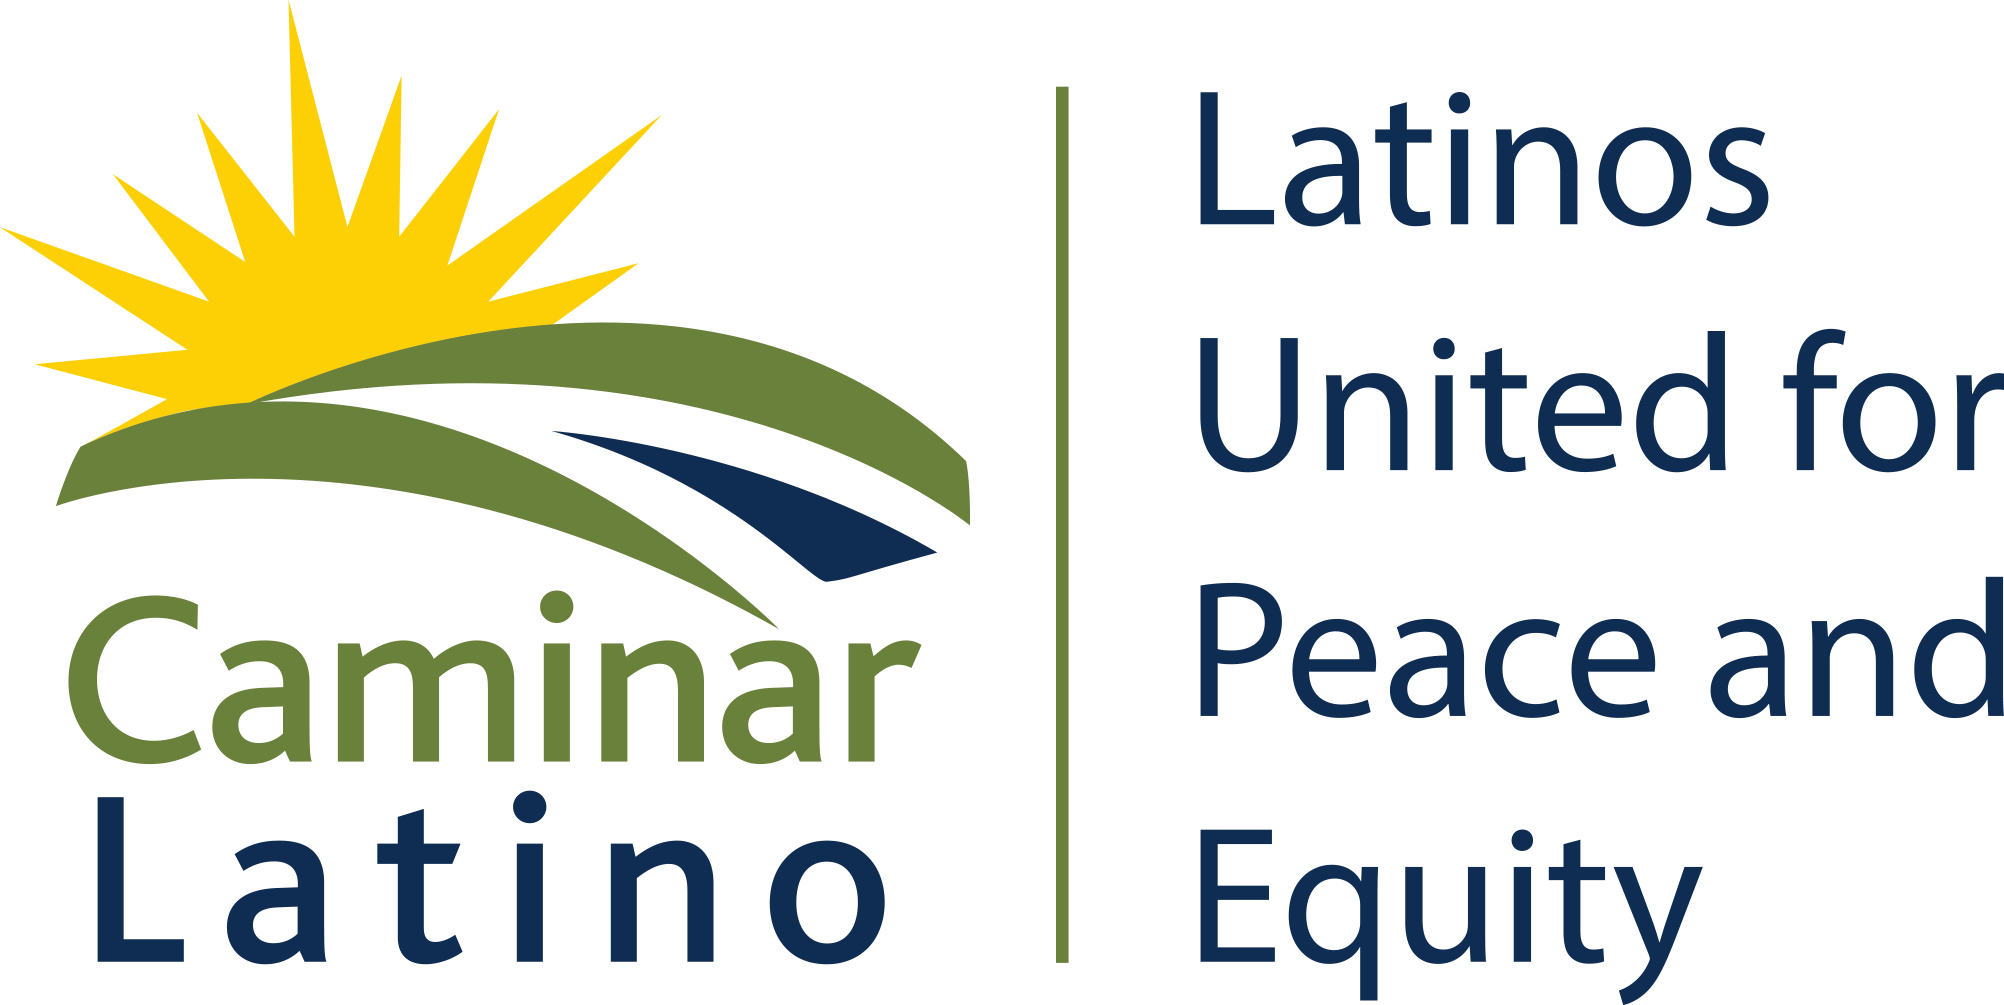 Caminar Latino/Lations United for Peace and Equity logo